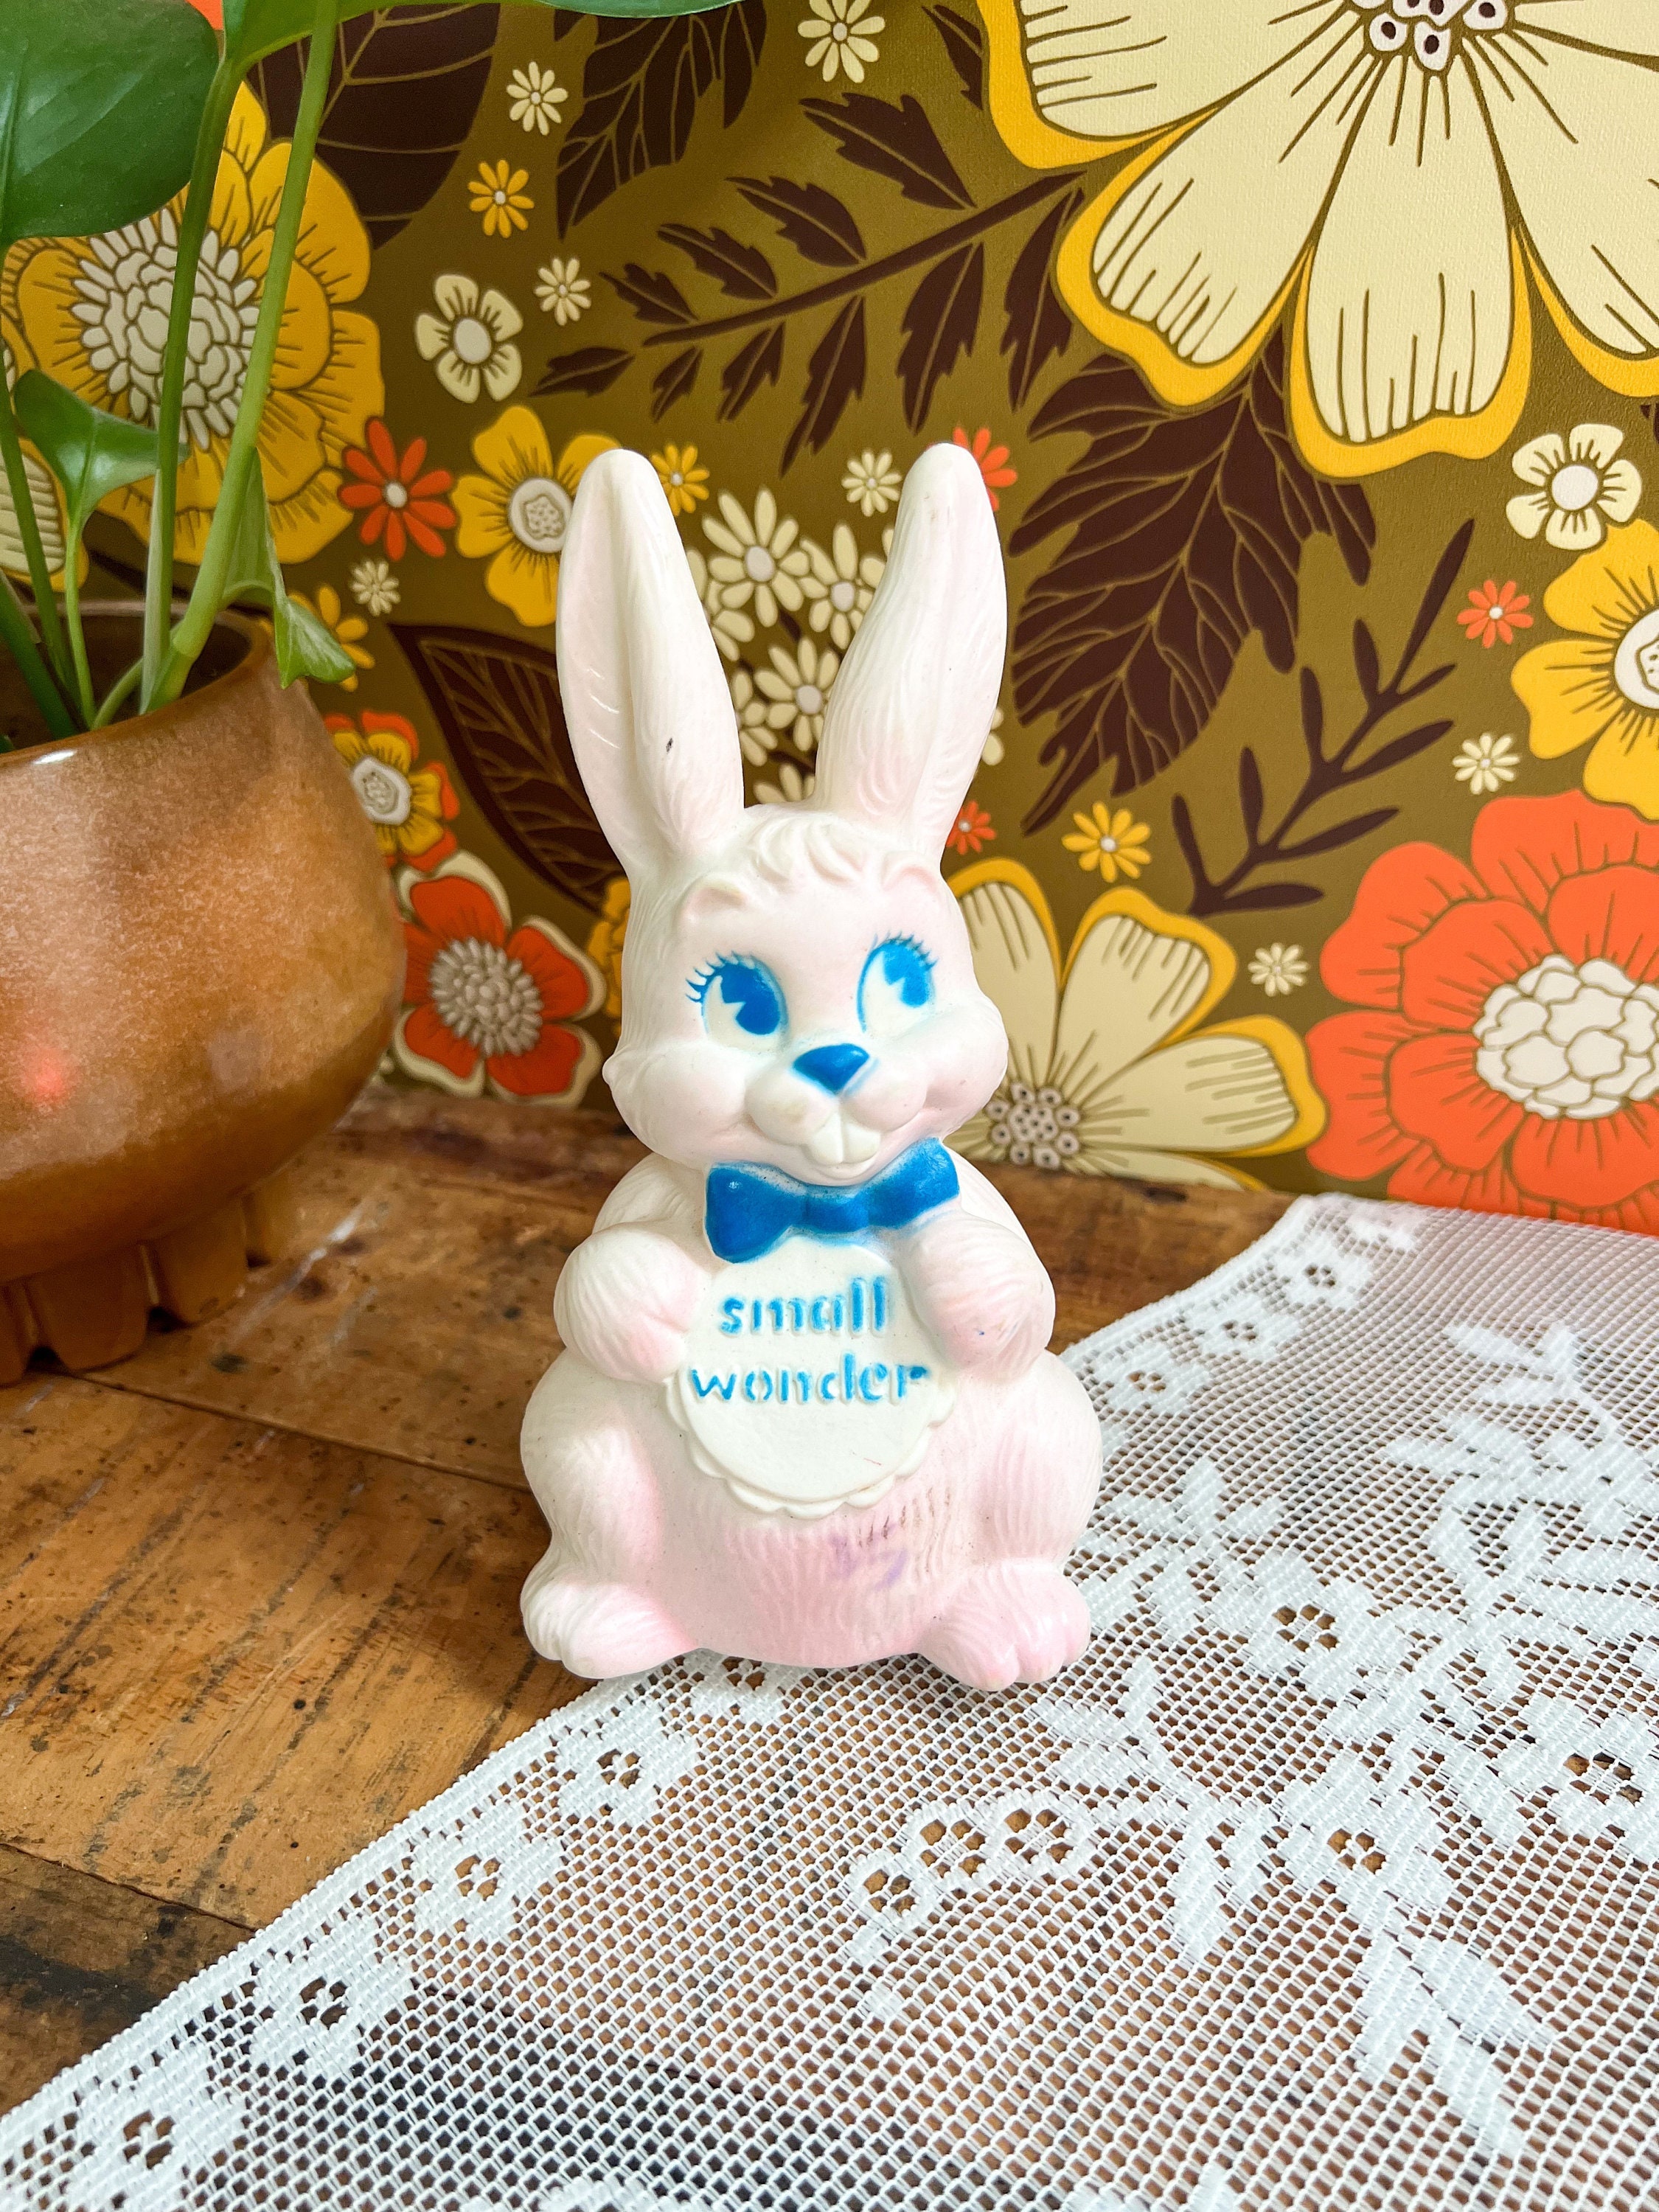 Vintage Girl Bunny Rabbit Easter Soft Rubber Squeeze Toy Dreamland